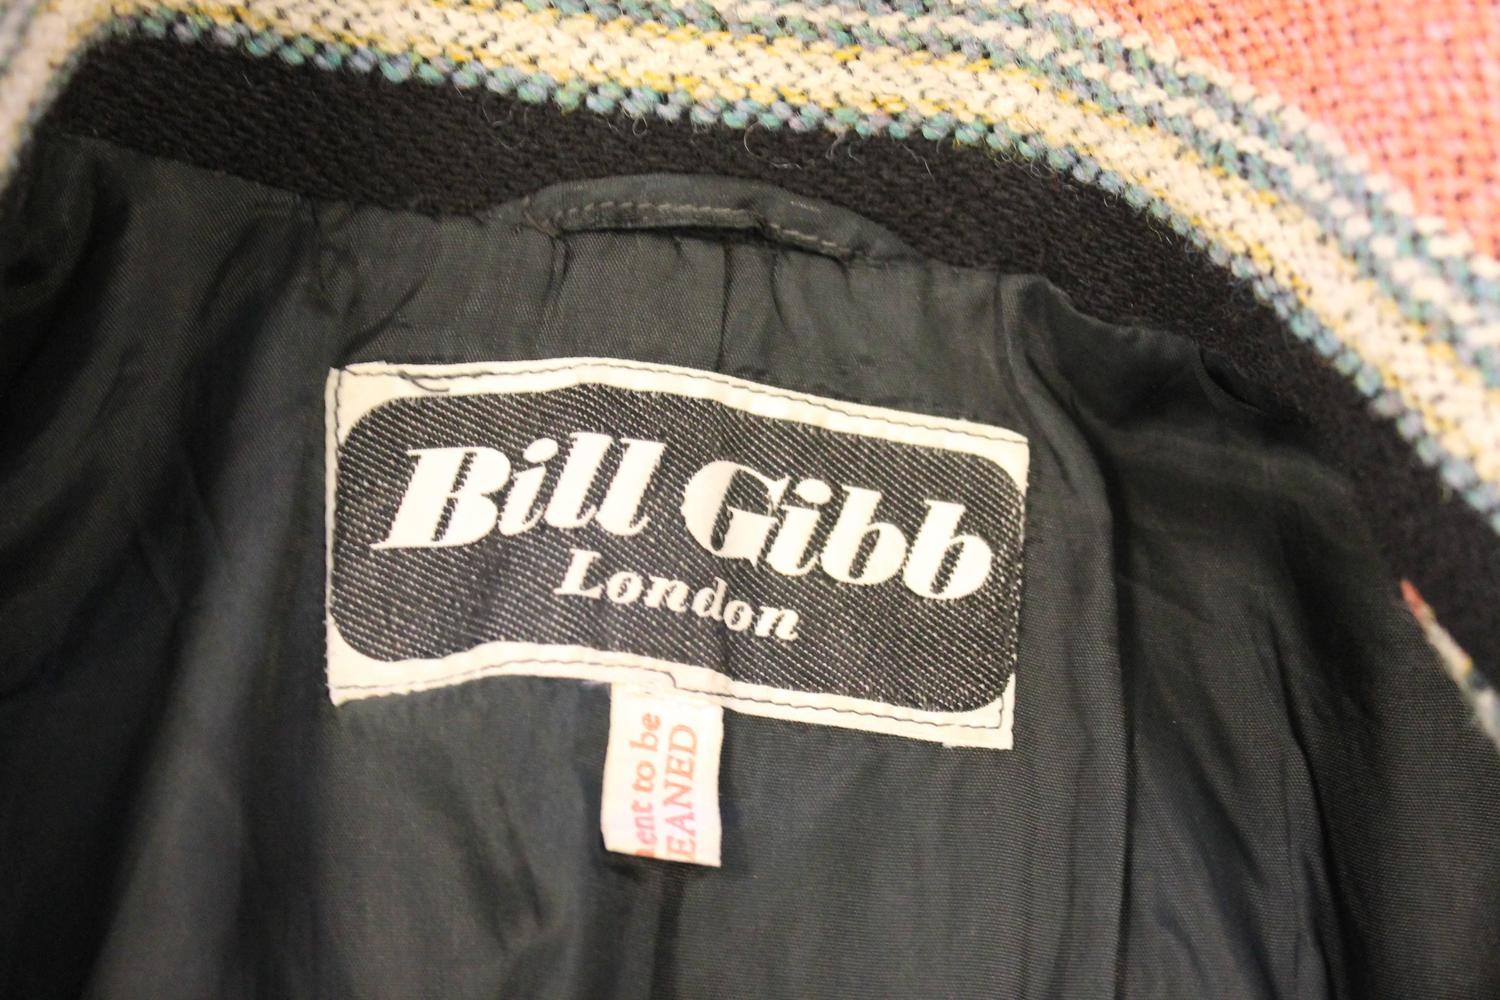 1970s Bill Gibb Woven Fitted Jacket For Sale at 1stdibs